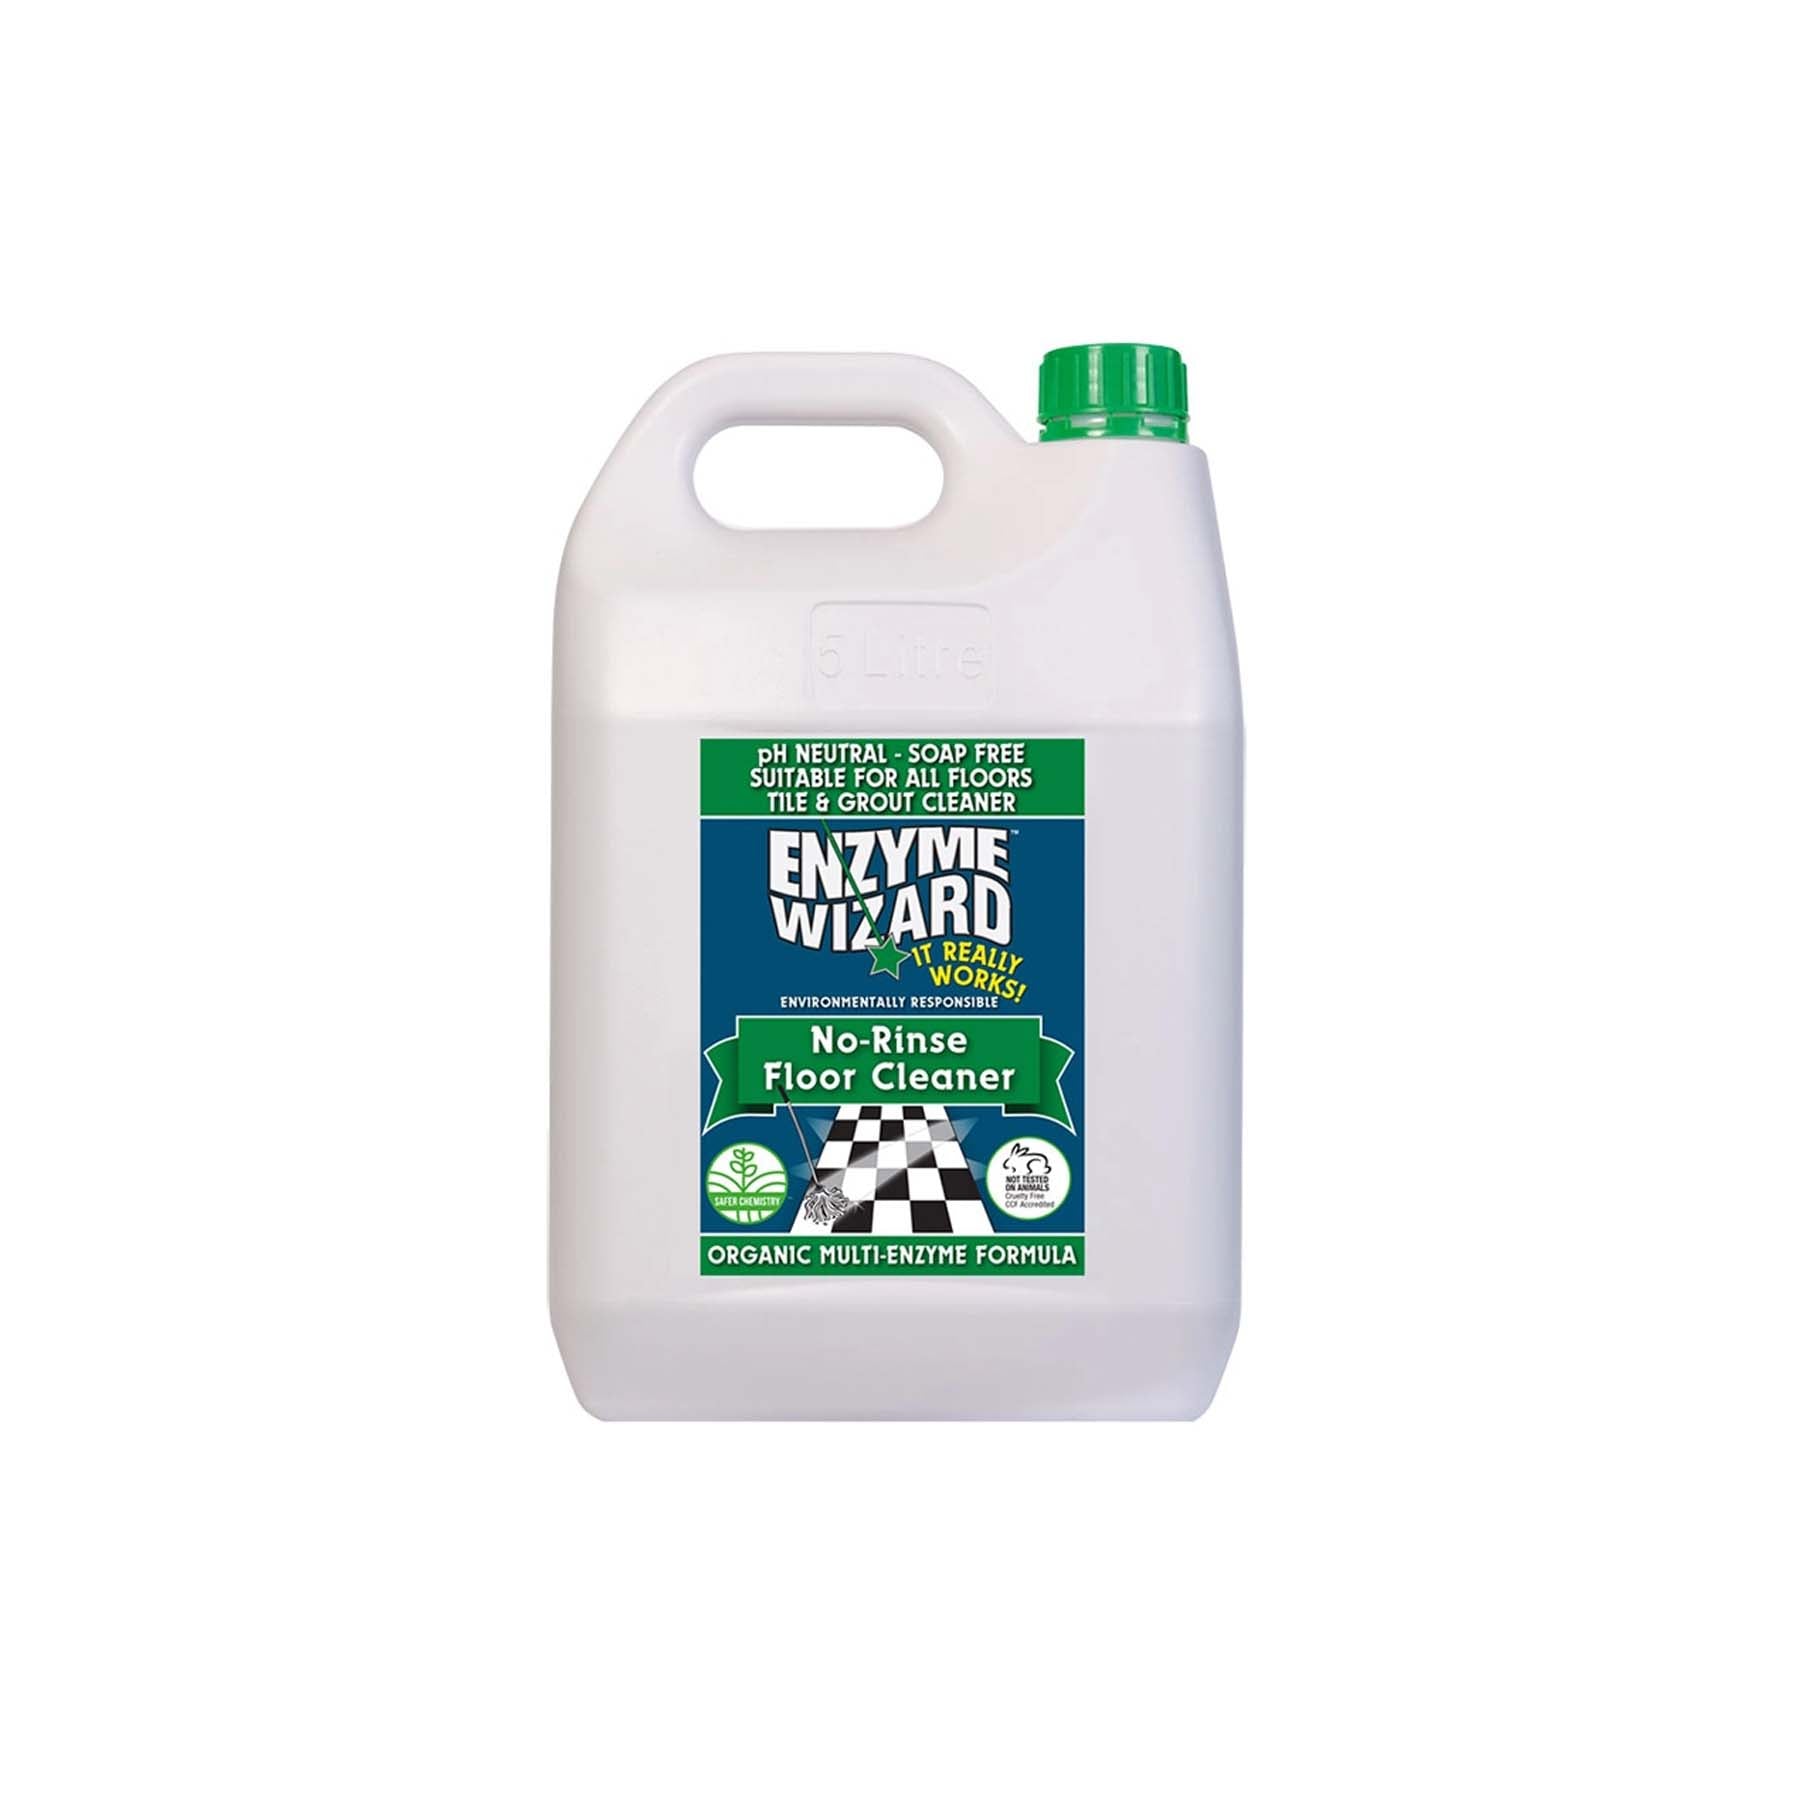 ENZYME WIZARD NO RINSE FLOOR CLEANER 5L